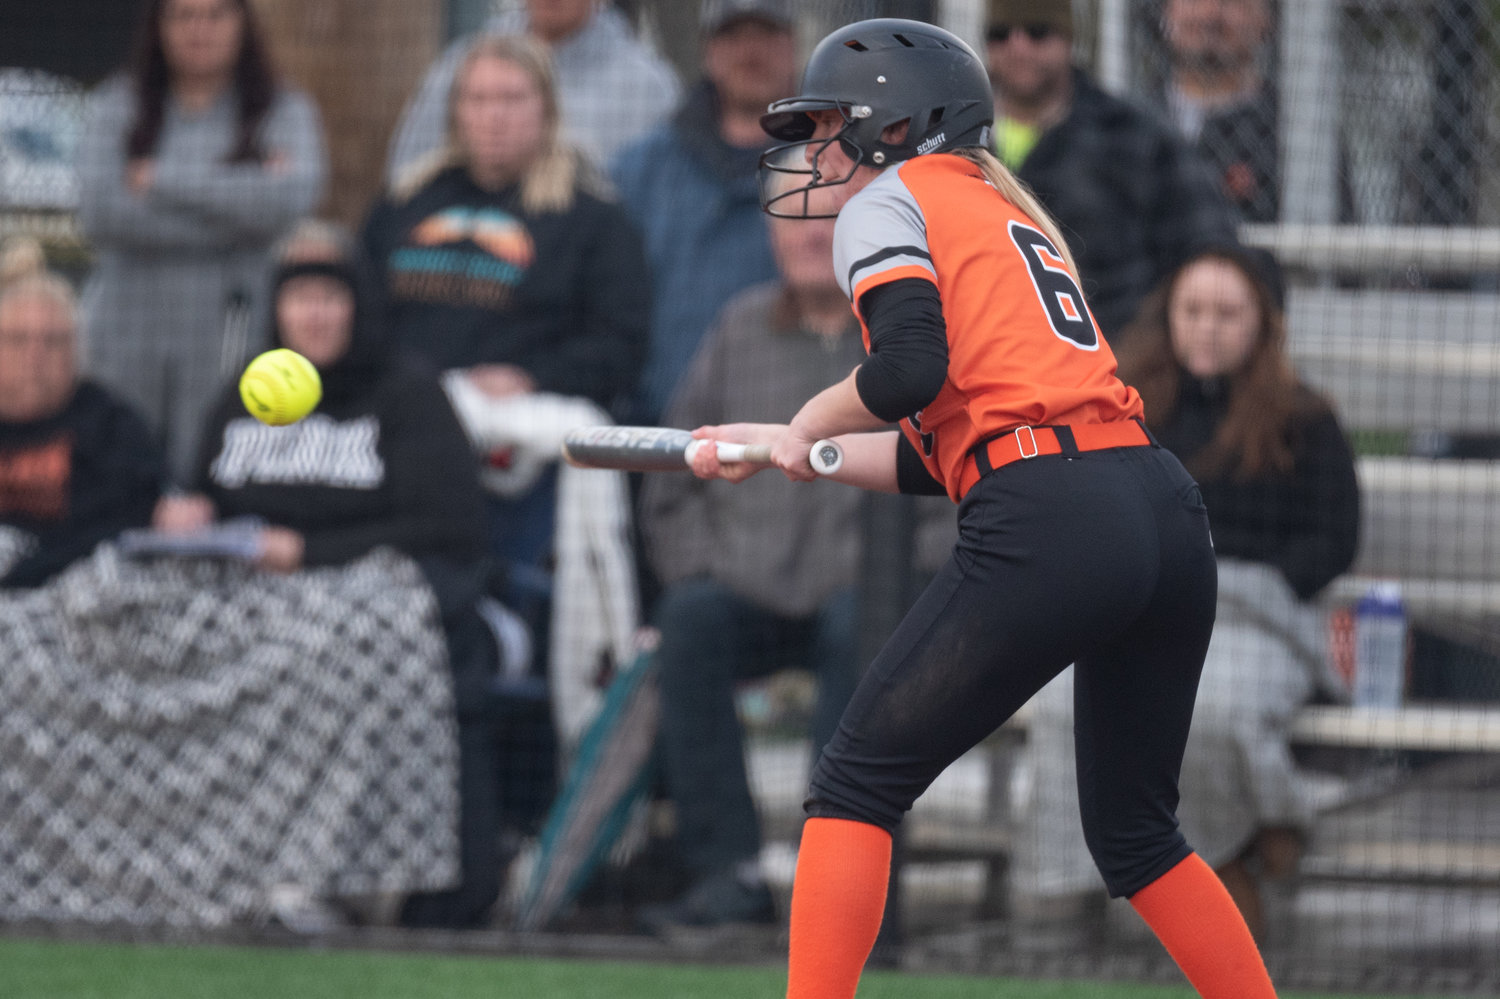 Centralia's Hannah Robbins looks to bunt against W.F. West April 26 at Recreation Park.